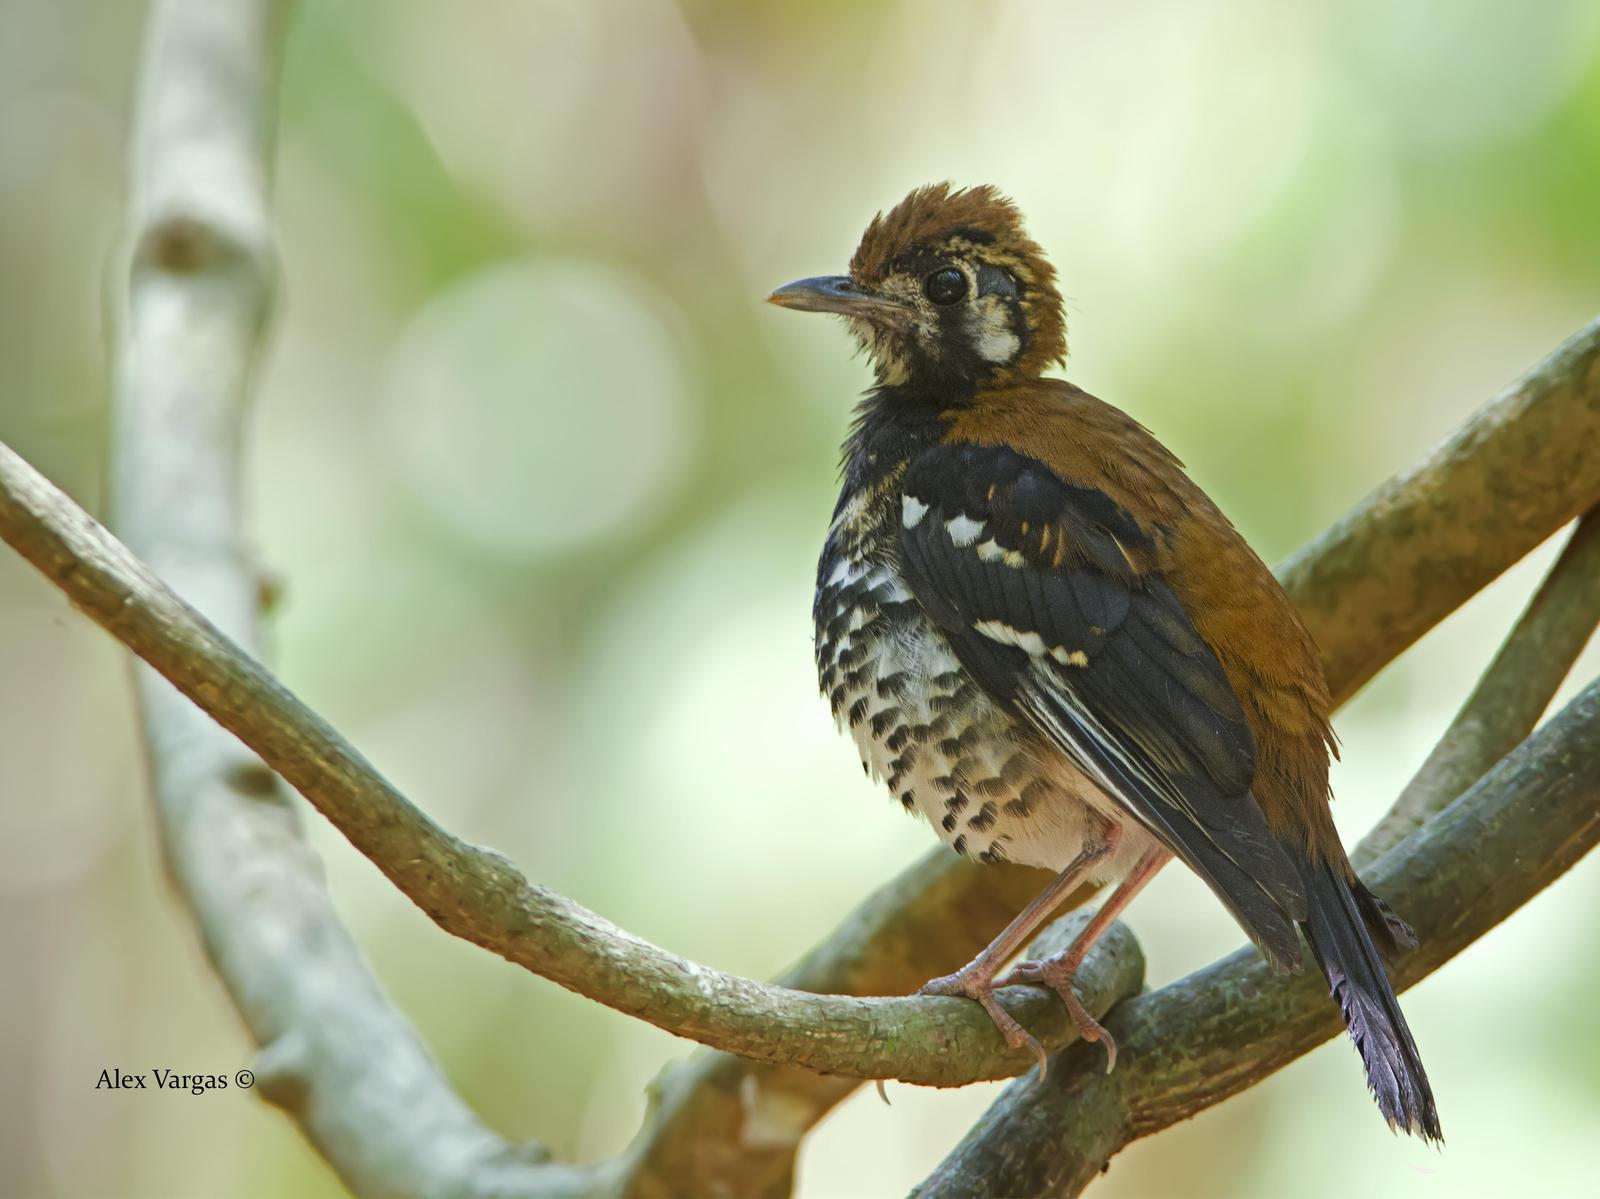 Rusty-backed Thrush Photo by Alex Vargas